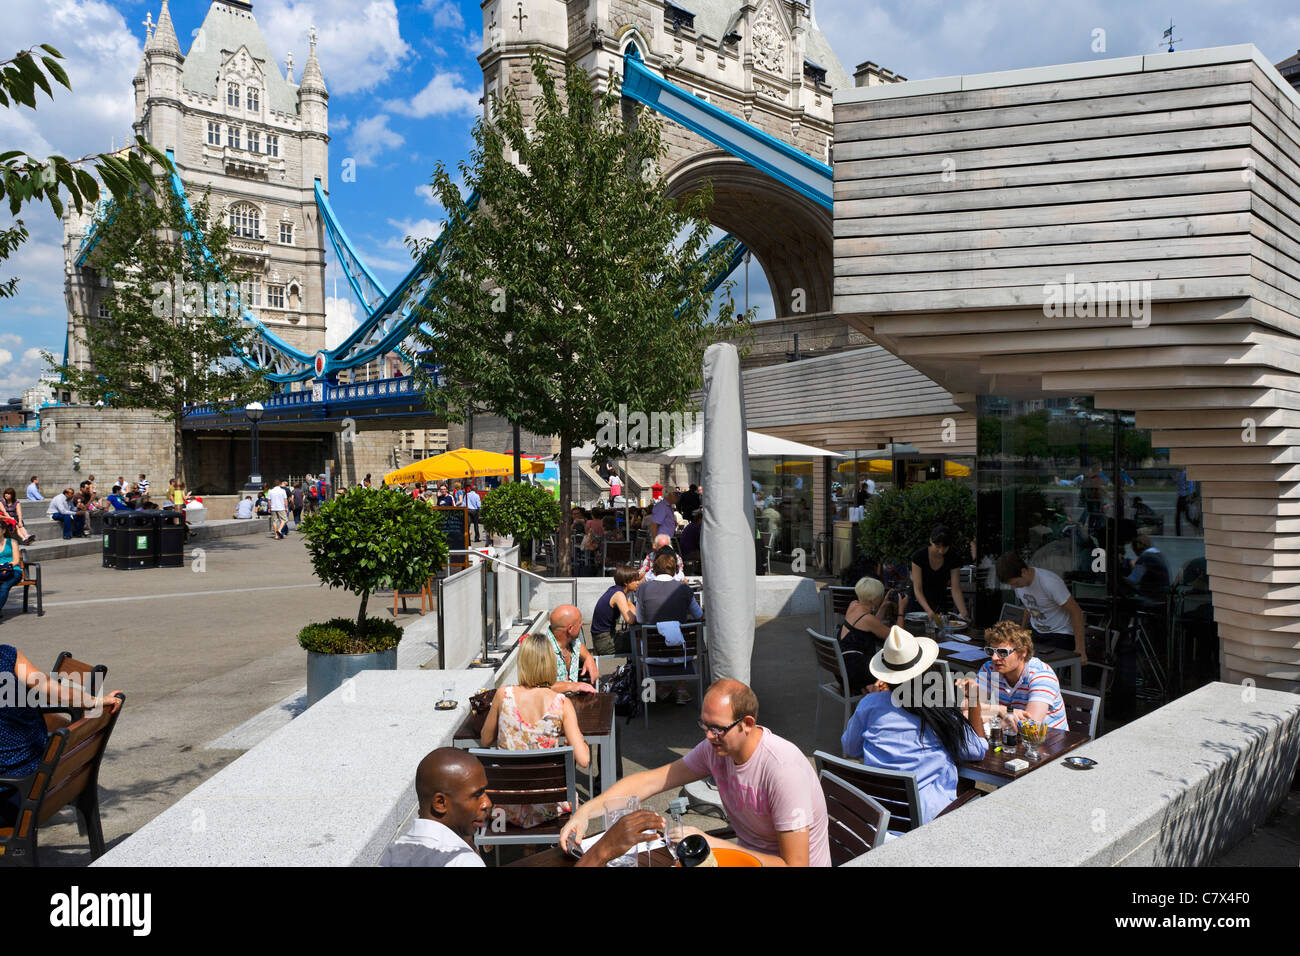 Restaurant on the South Bank of the River Thames in front of Tower Bridge, London, England Stock Photo